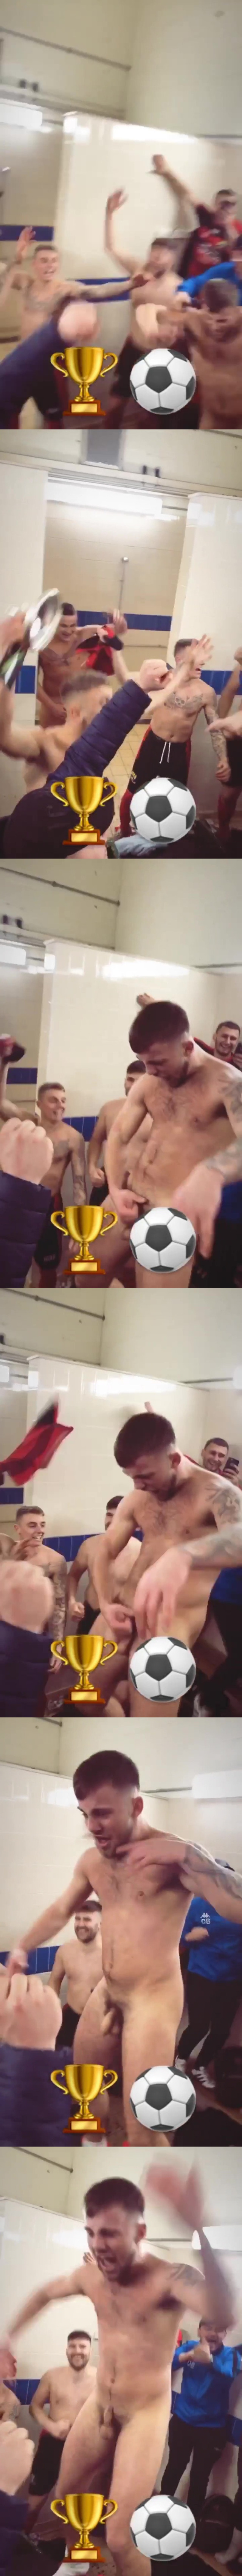 footballers with no shame showing off naked in the locker room